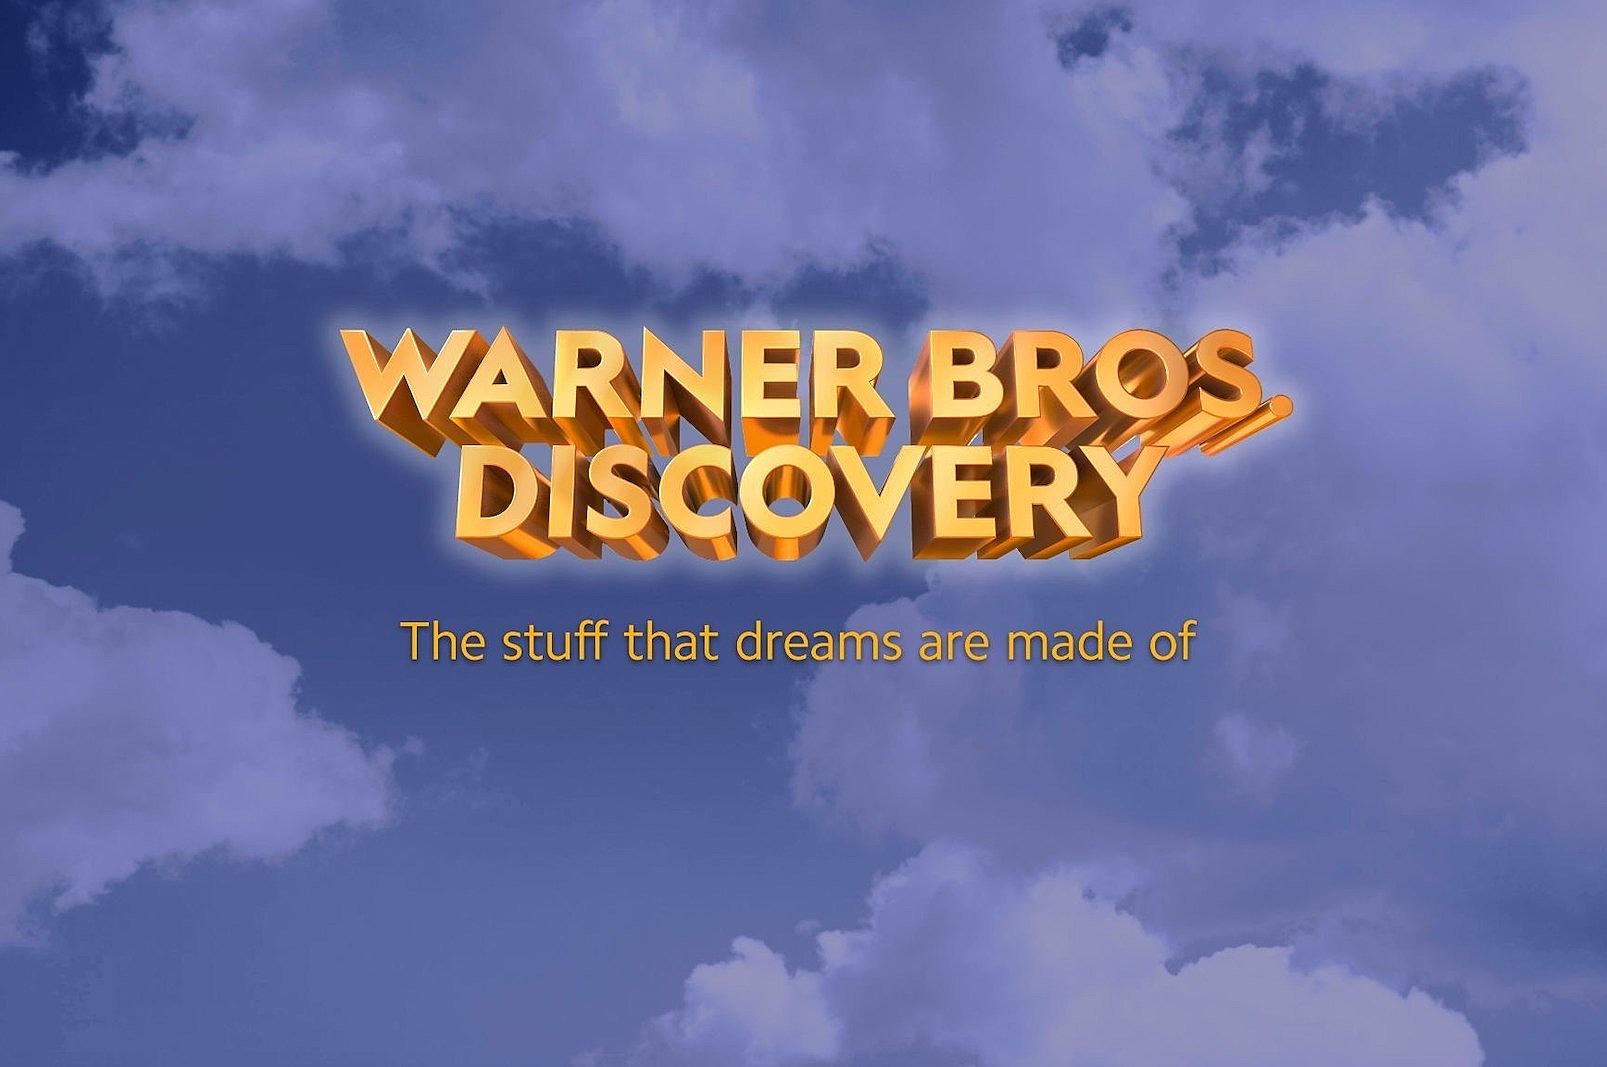 The risks and rewards of a Warner Bros. Discovery and Paramount